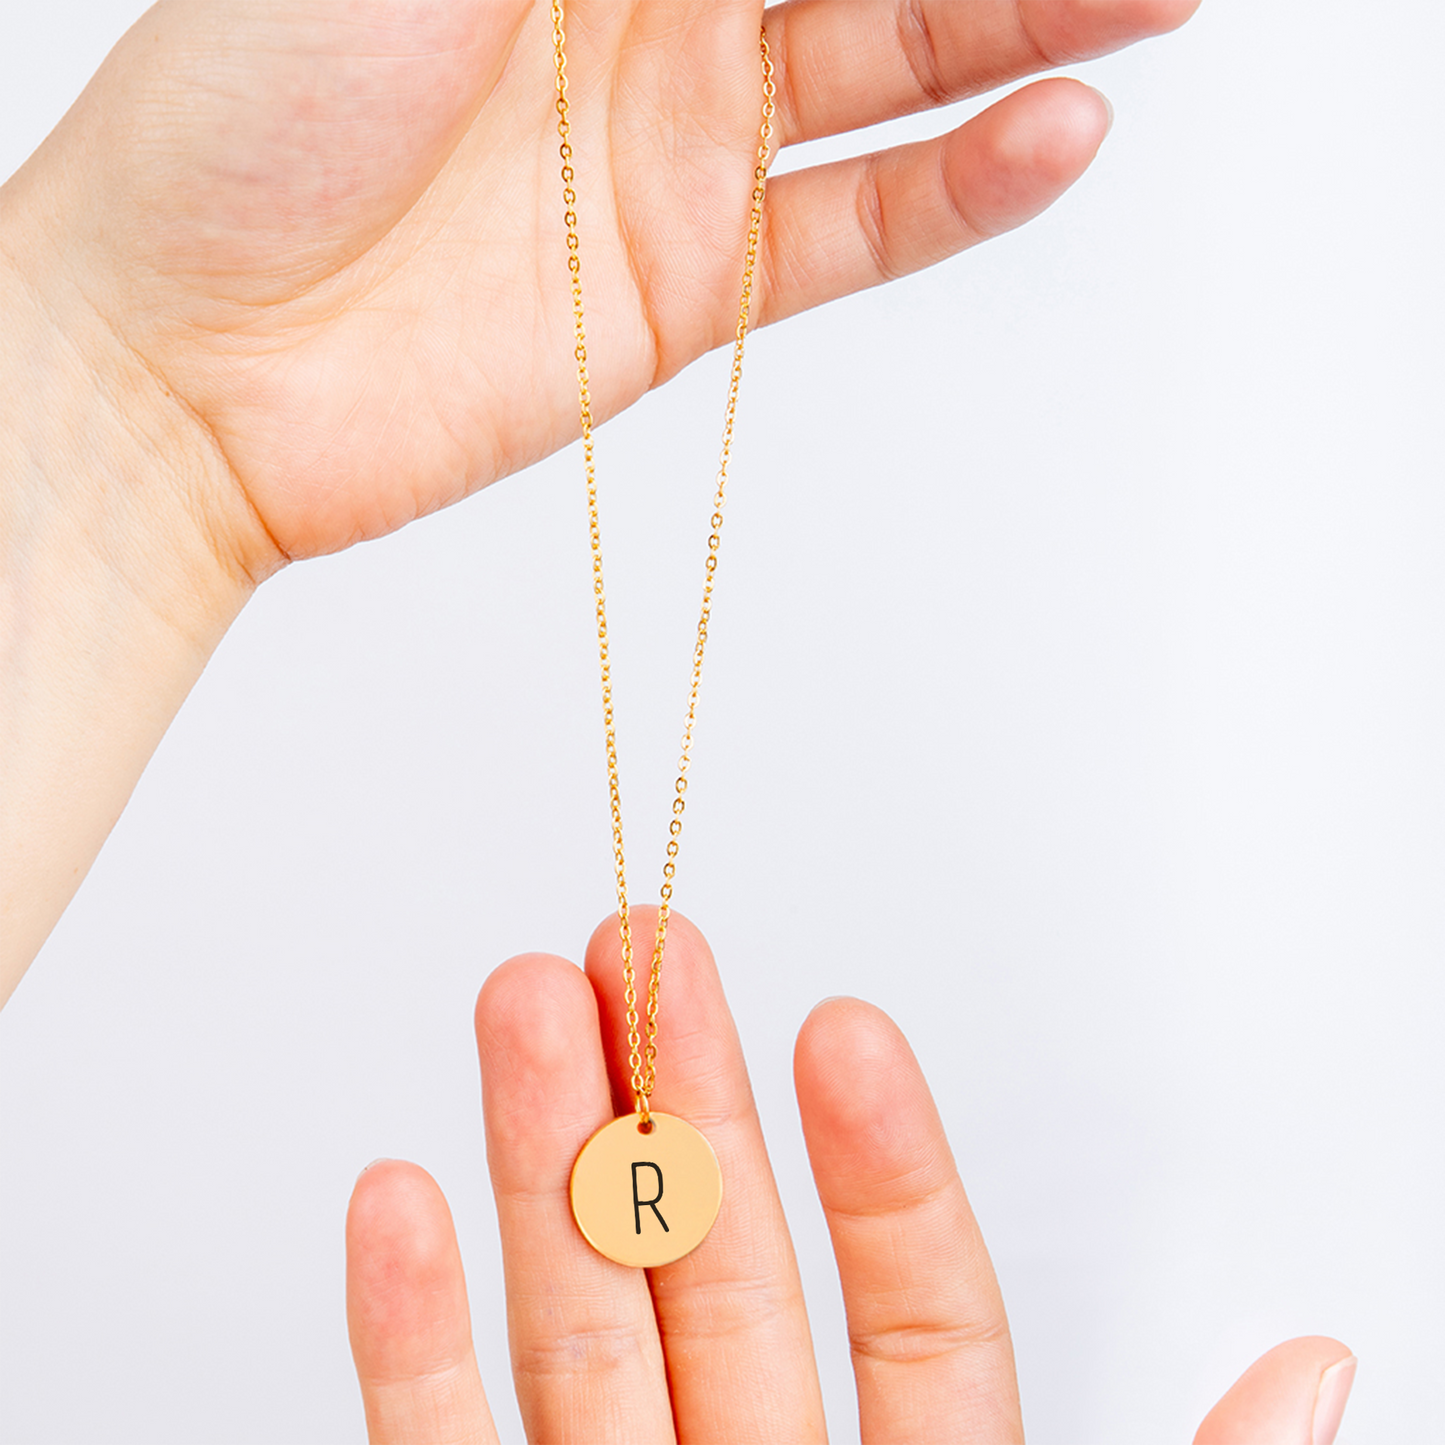 Best Friend Initial Coin Necklace